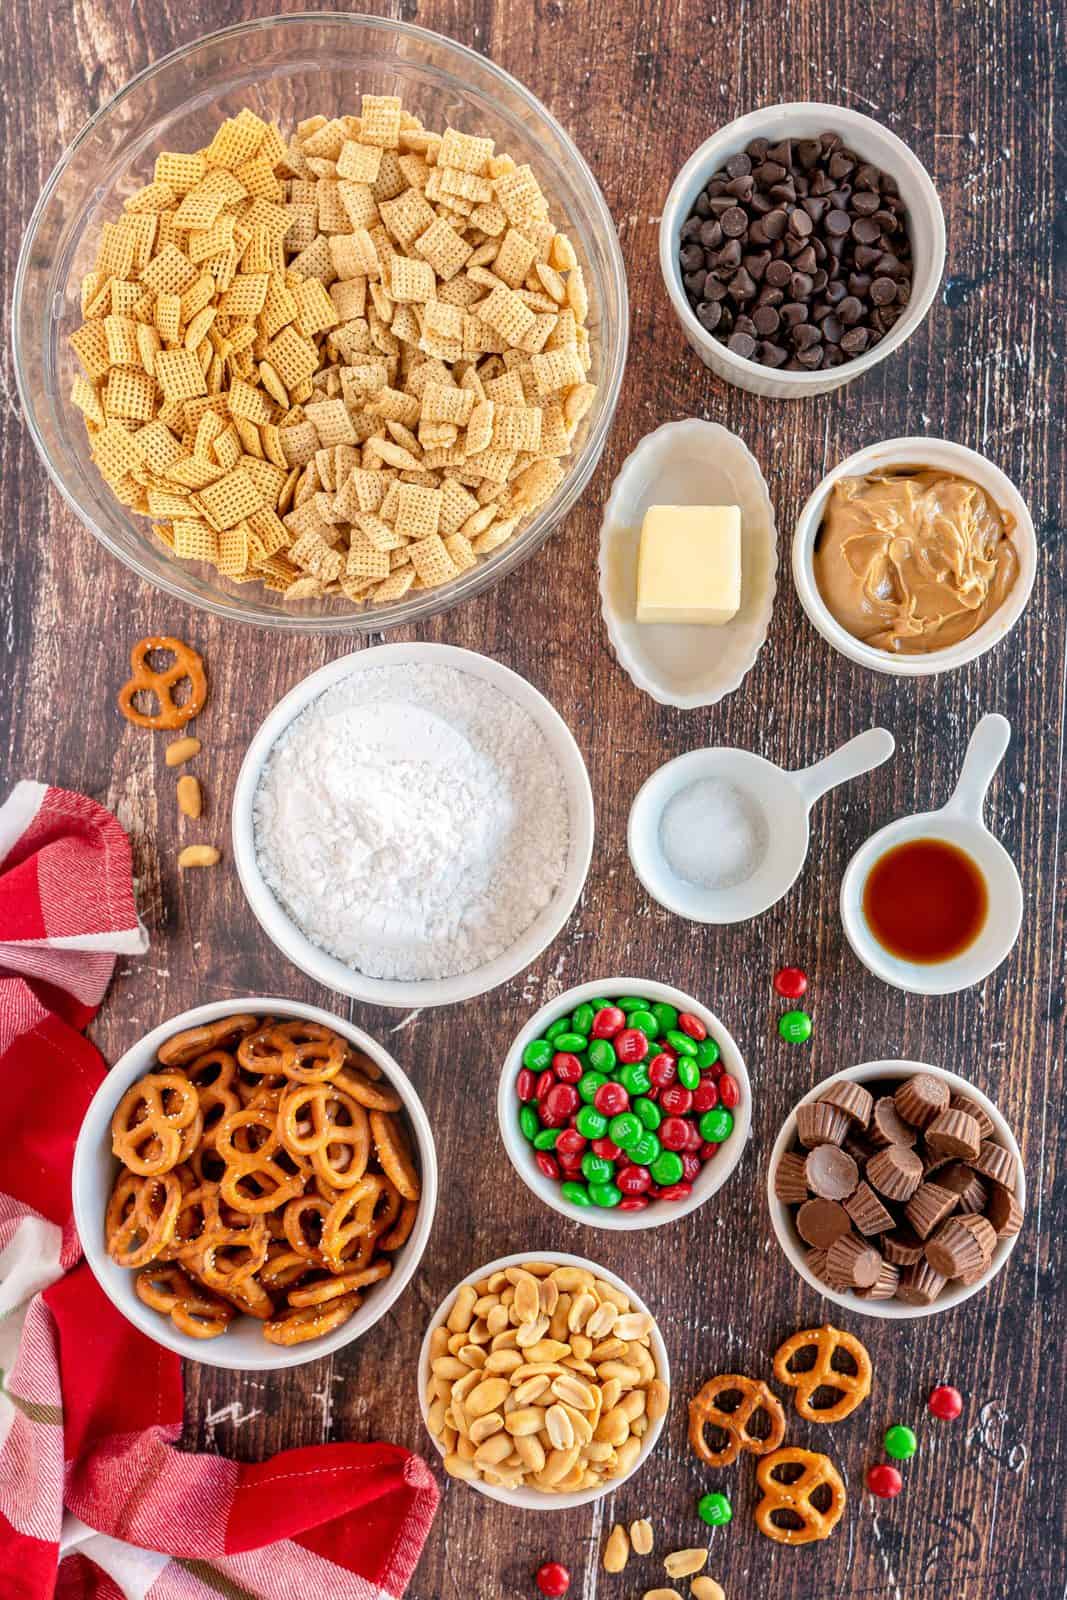 Ingredients needed: corn chex, rice chex, semi-sweet chocolate chips, peanut butter, salted butter, vanilla, salt, powdered sugar, Christmas M&Ms, pretzels, salted peanuts and Reese's Mini Peanut Butter Cups.